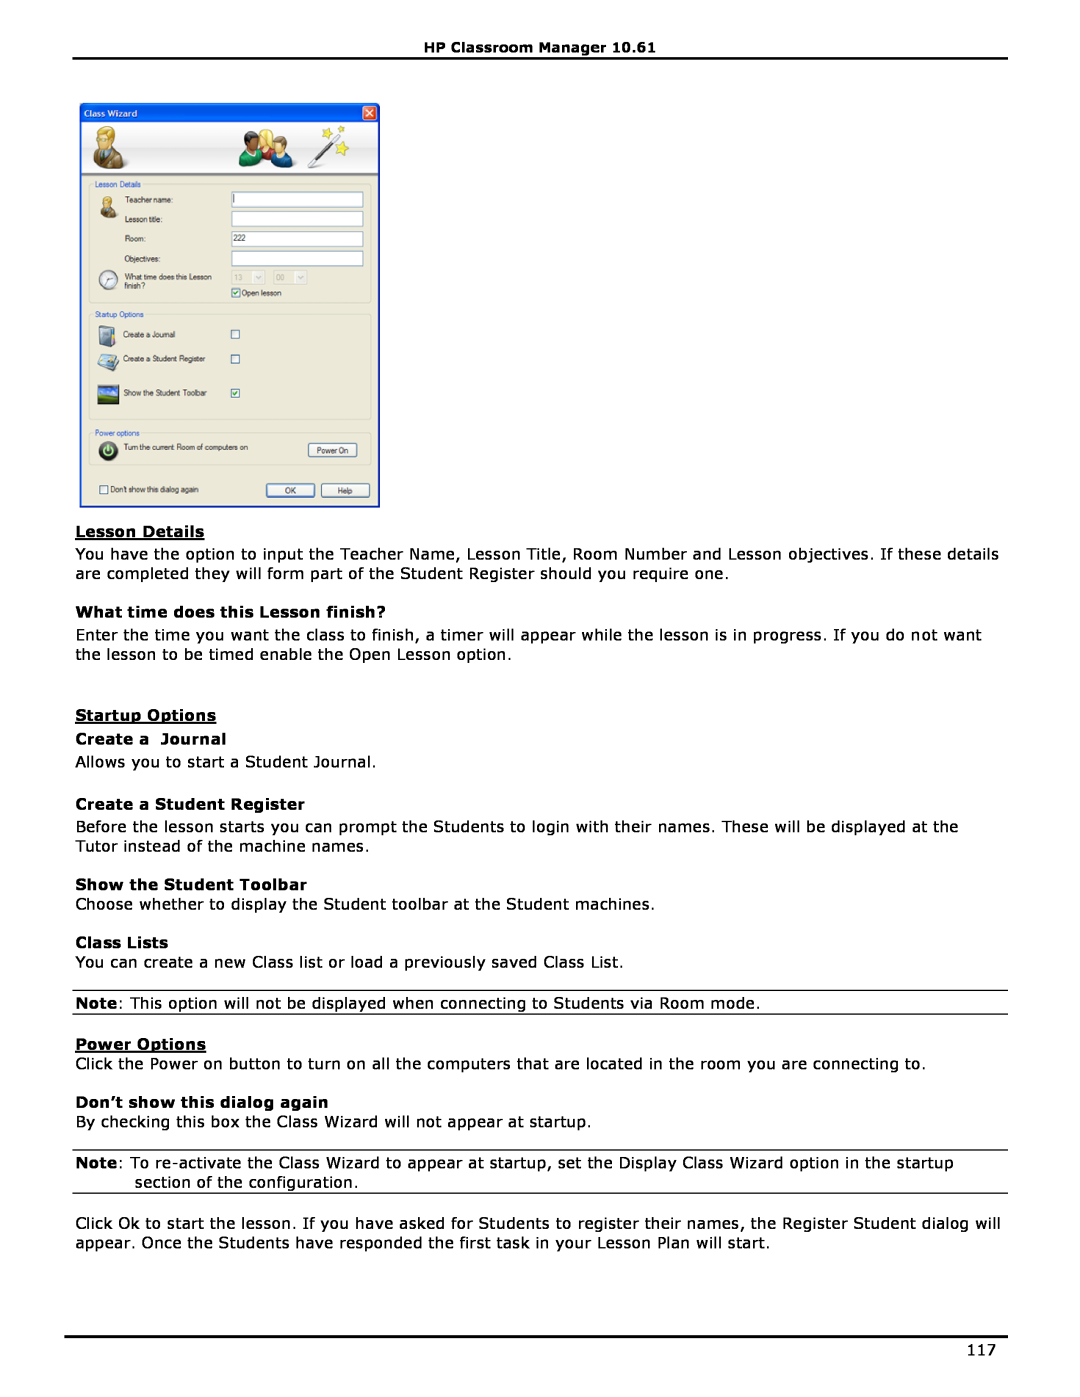 HP Classroom Manager Lesson Details, What time does this Lesson finish?, Startup Options Create a Journal, Class Lists 